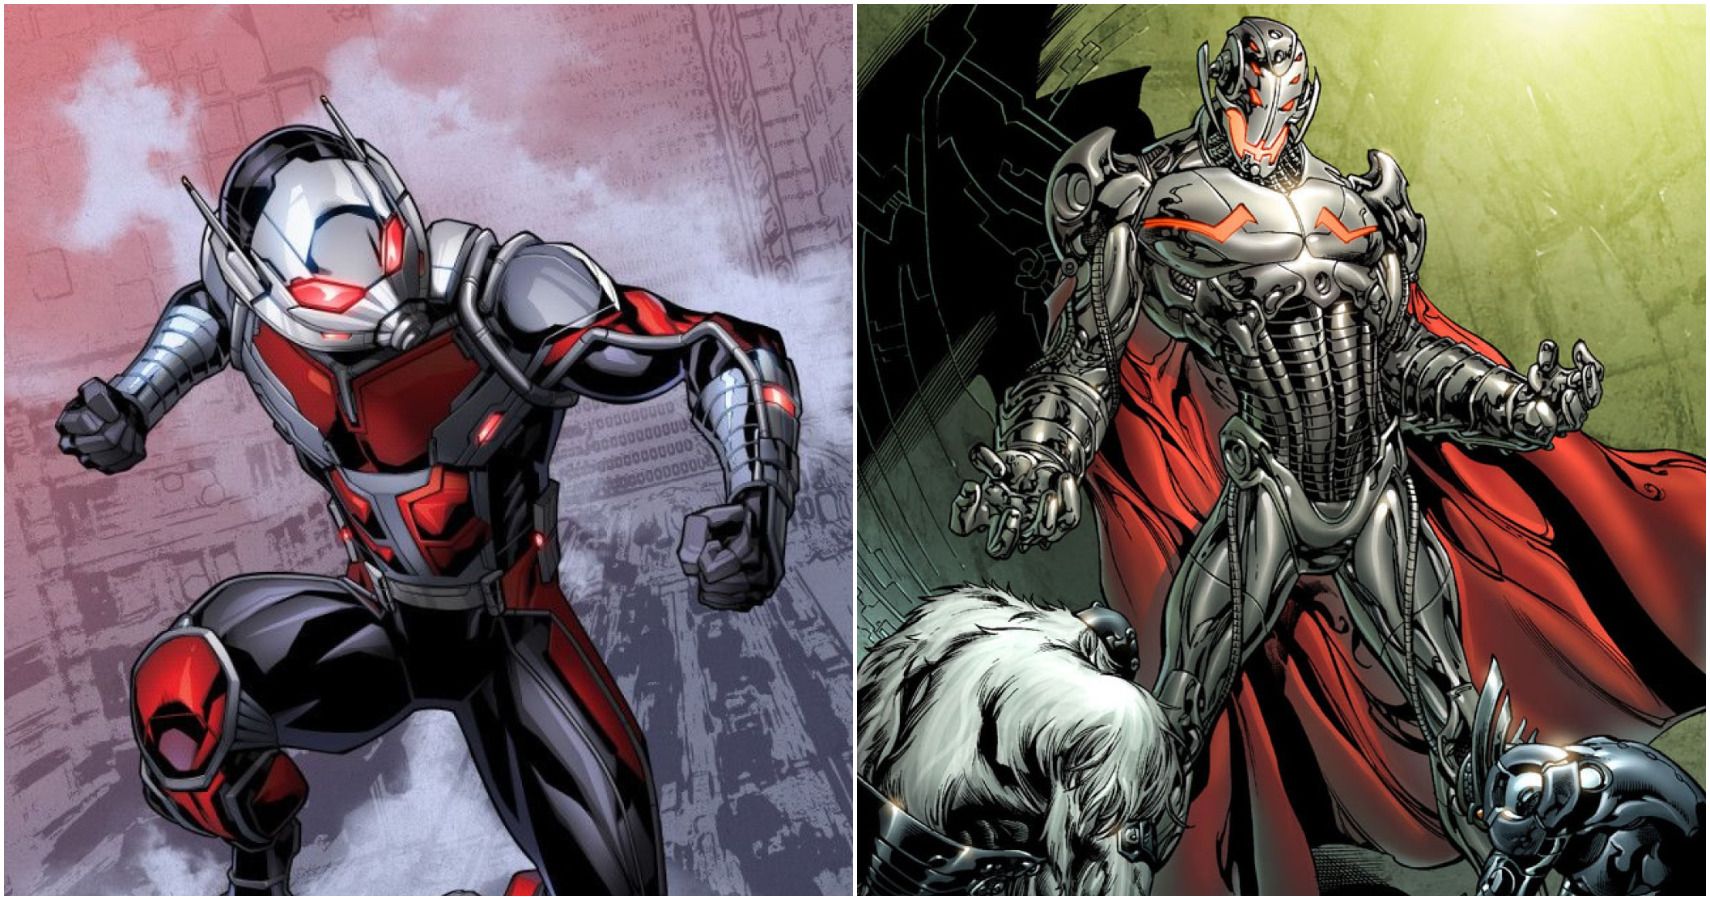 Ant-Man faces an Uber for super villains and more in this week's new comics